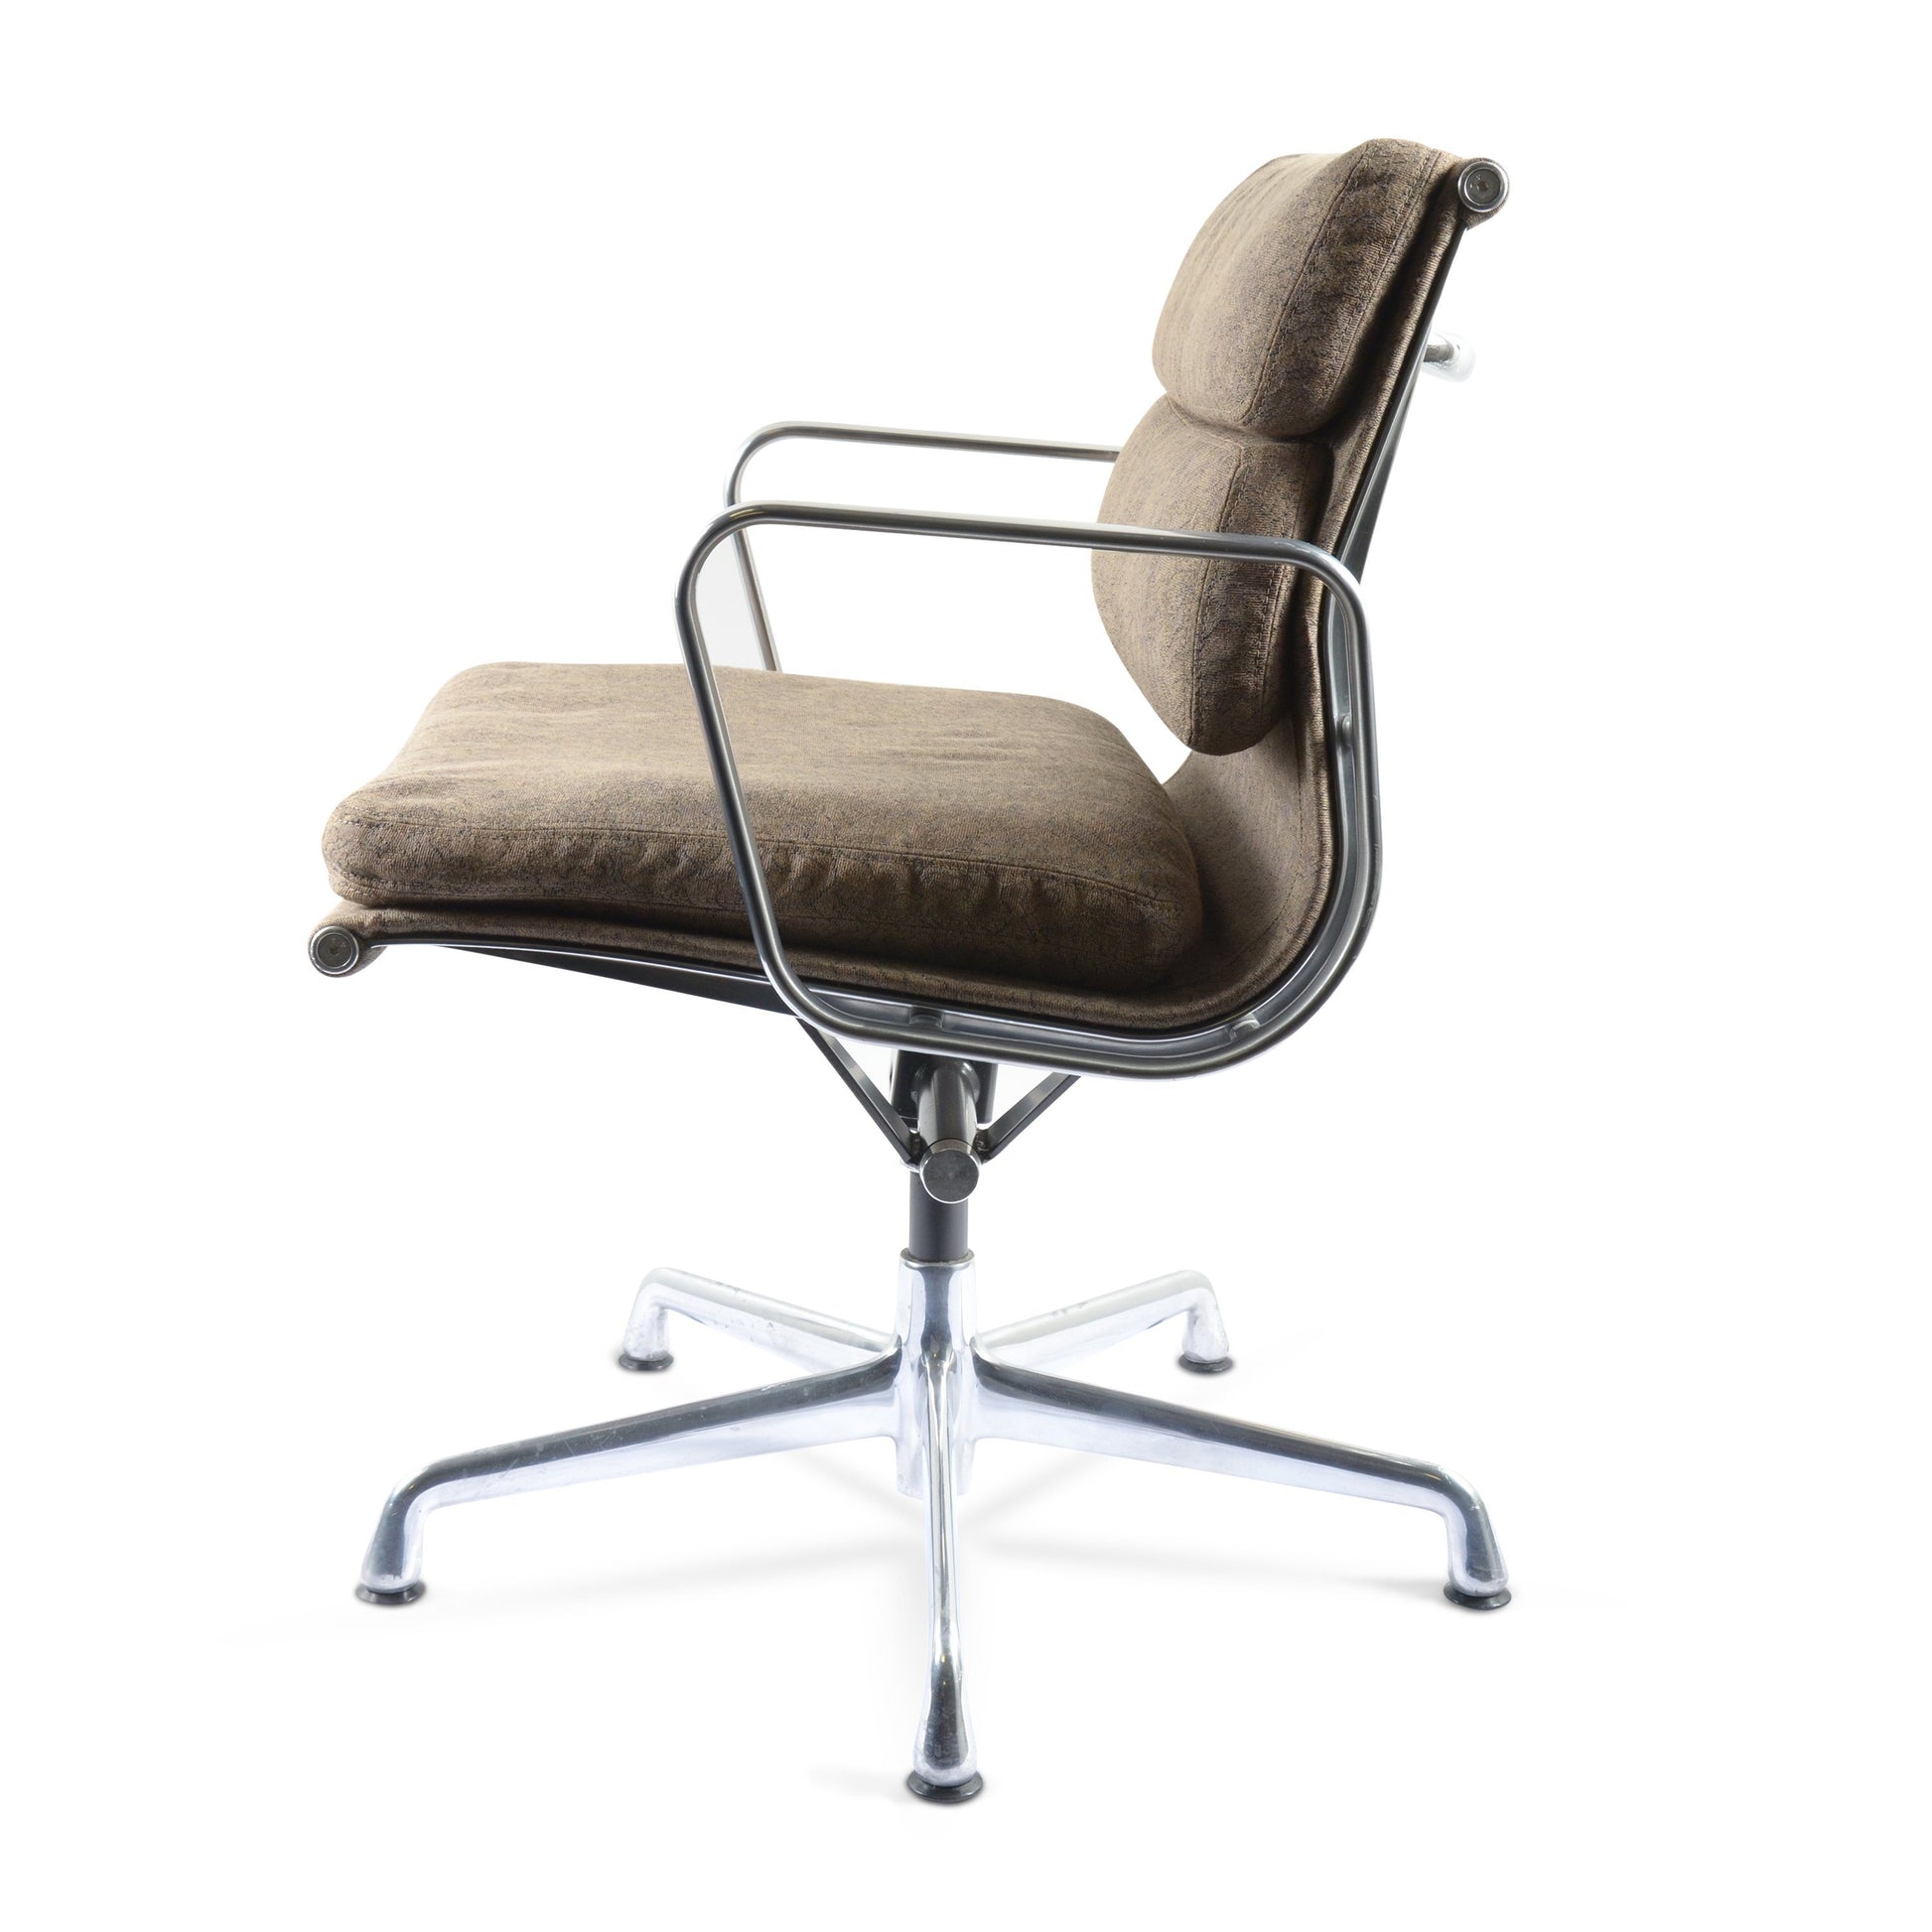 Herman Miller Eames Chairs - Refurbished Office Chairs - Used Office